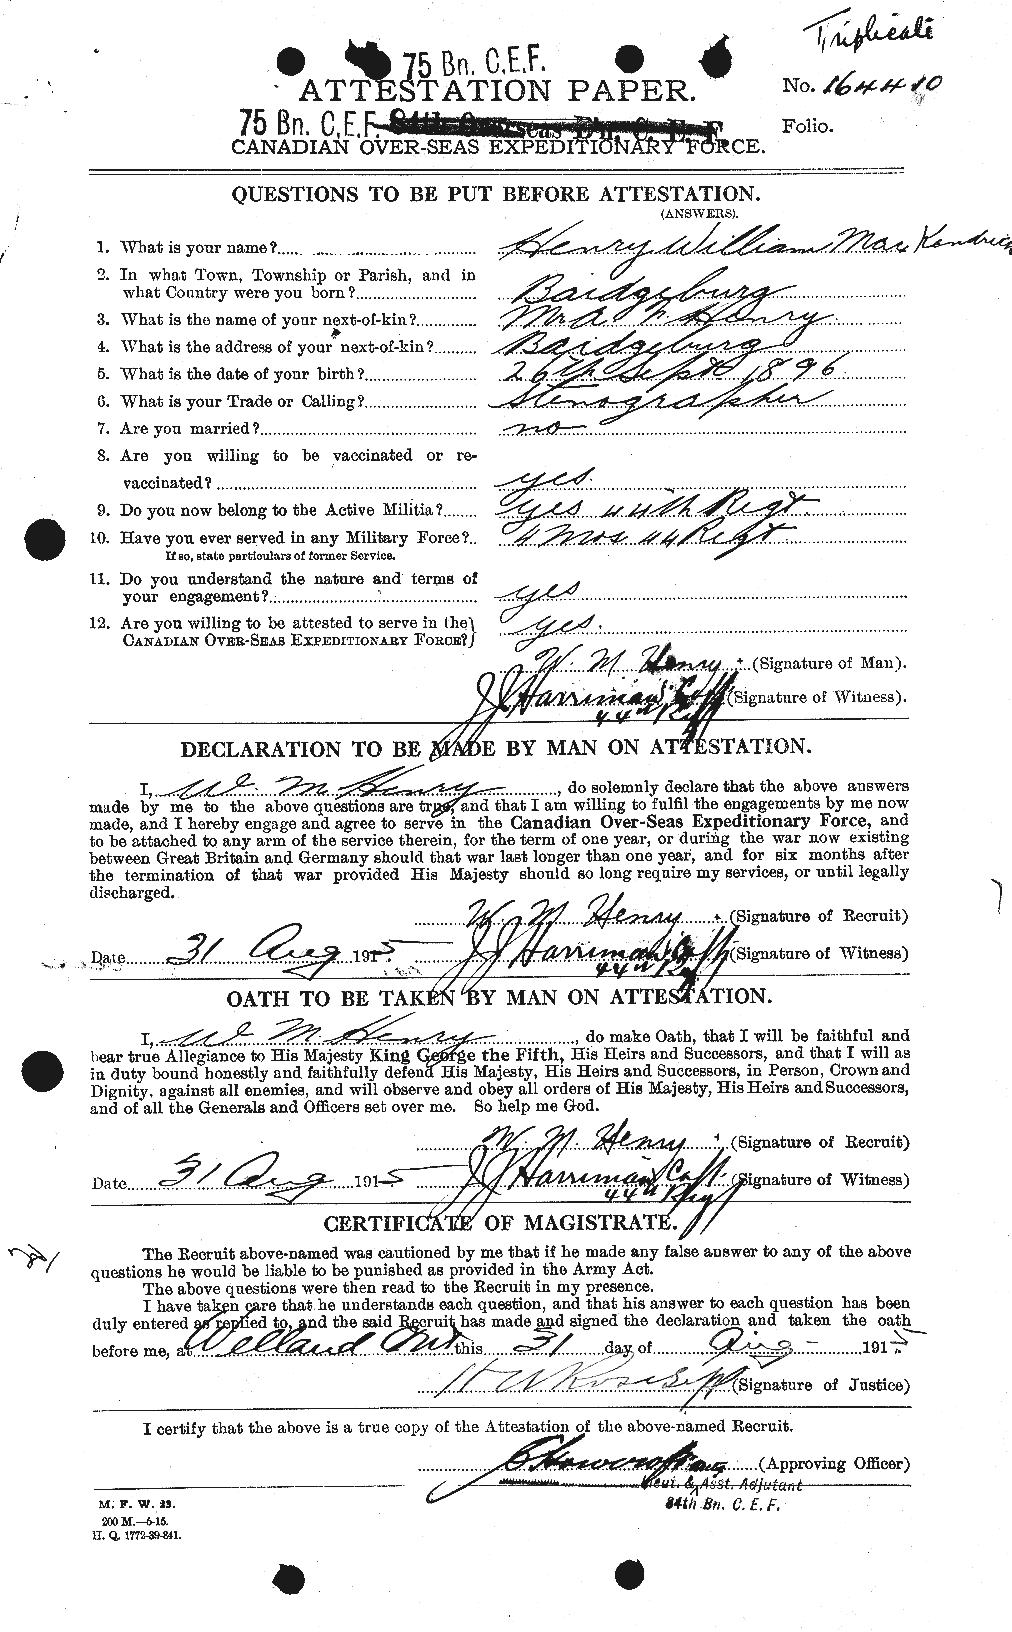 Personnel Records of the First World War - CEF 387792a